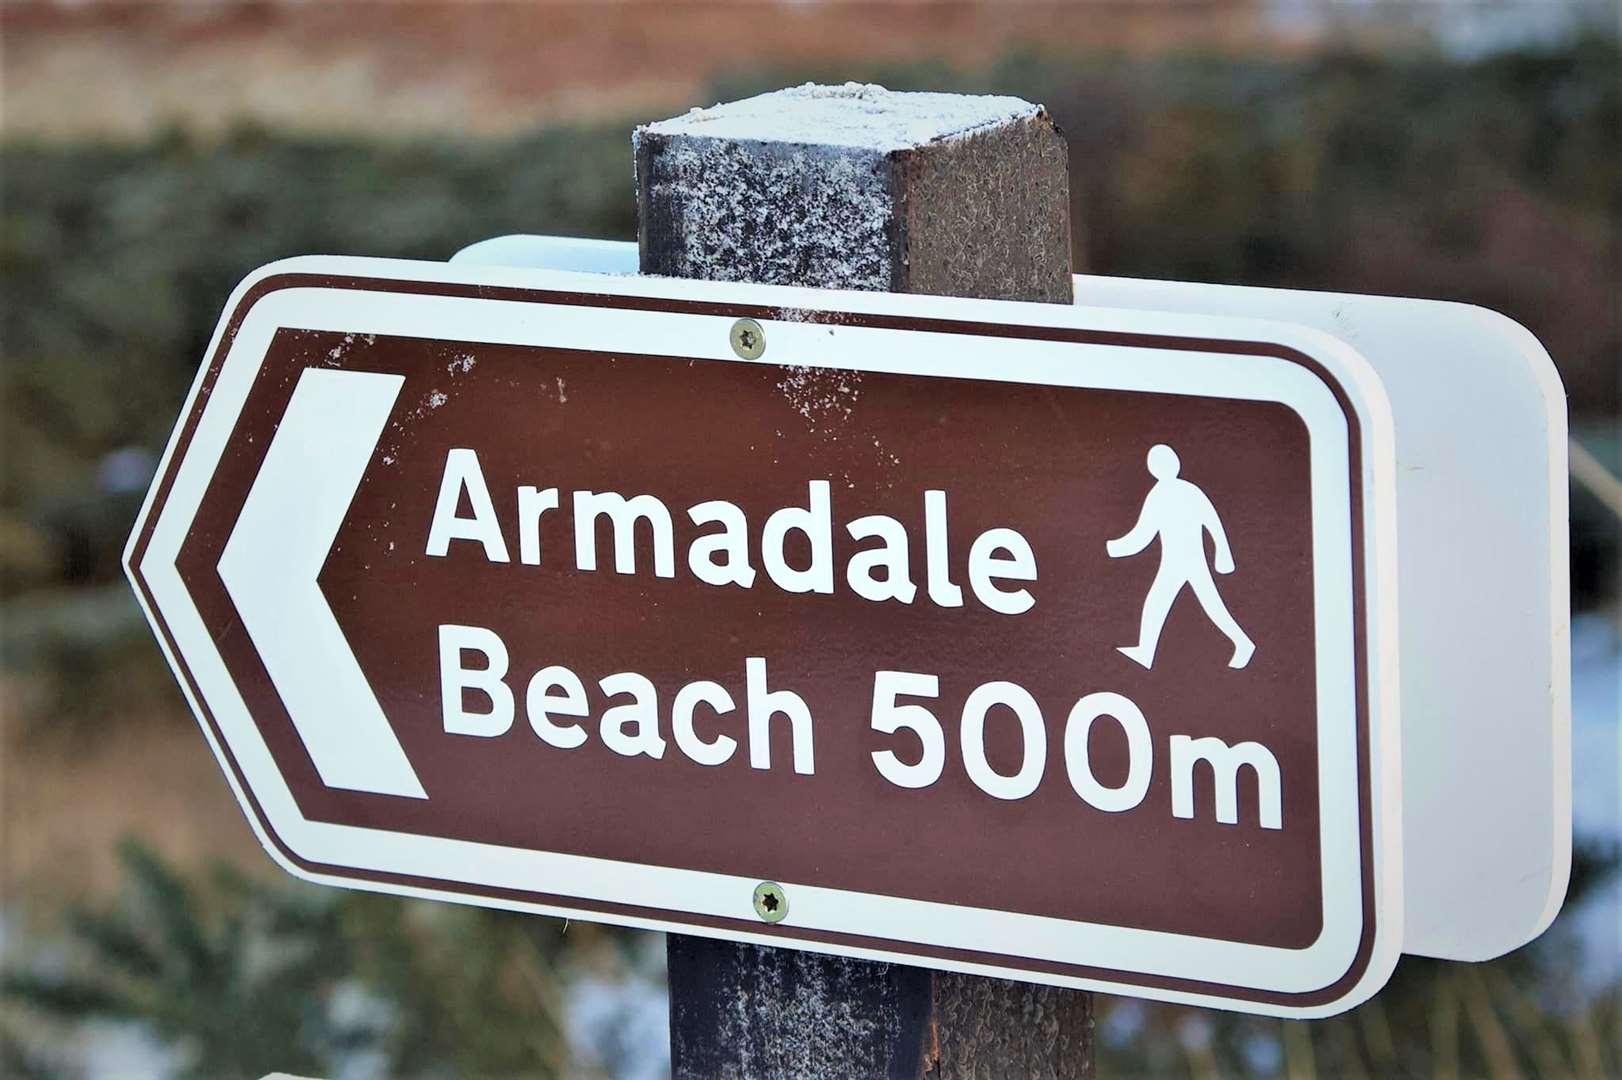 A sign at the new footpath down to the beach at Armadale.